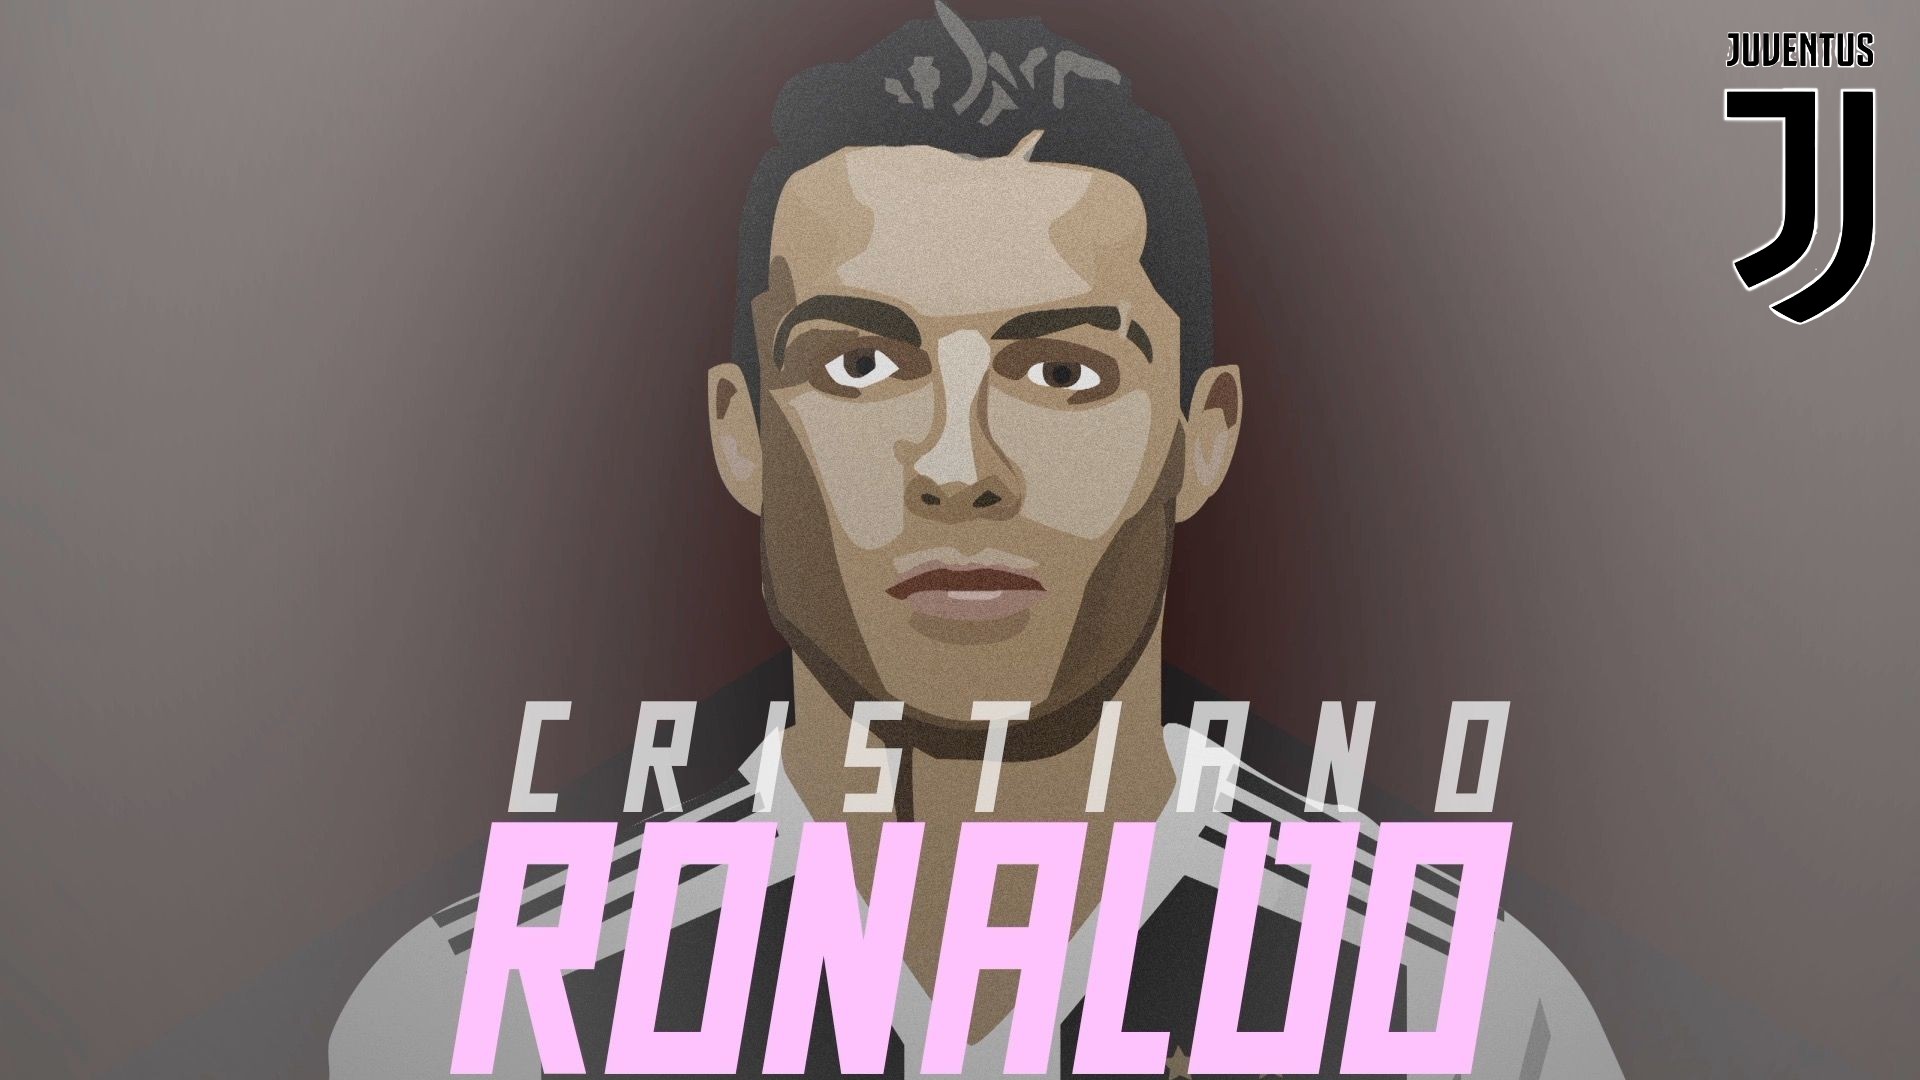 Cristiano Ronaldo Juve HD Wallpapers With Resolution 1920X1080 pixel. You can make this wallpaper for your Mac or Windows Desktop Background, iPhone, Android or Tablet and another Smartphone device for free